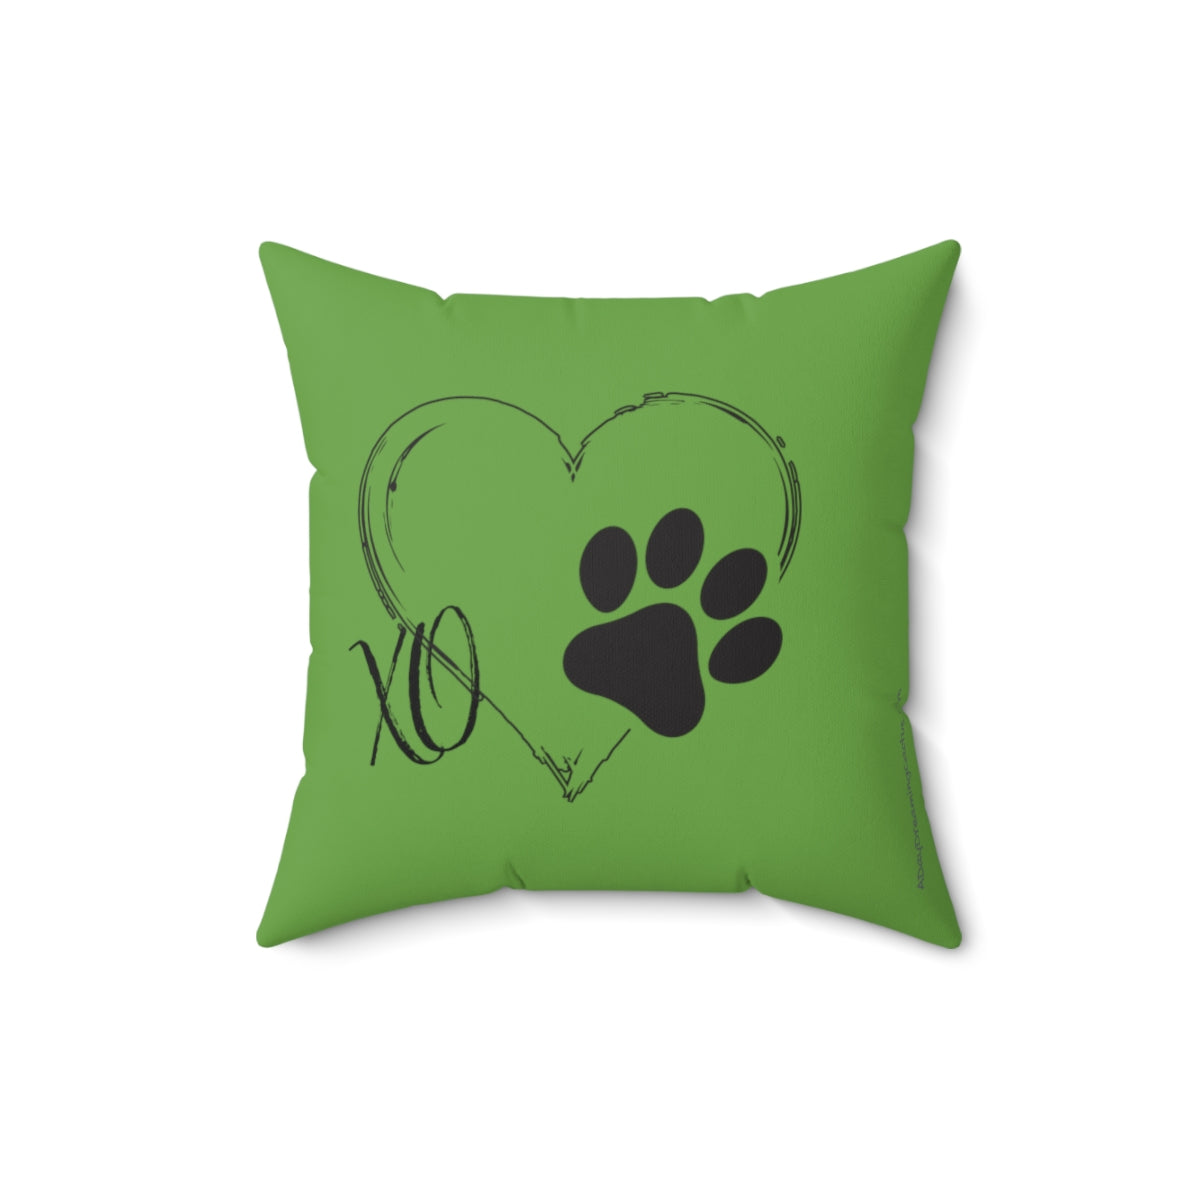 Green Square Pillow Case - Some Things Fill Your Heart Without Trying - Home Decor Pillow Cover - Accent Pillow Cover